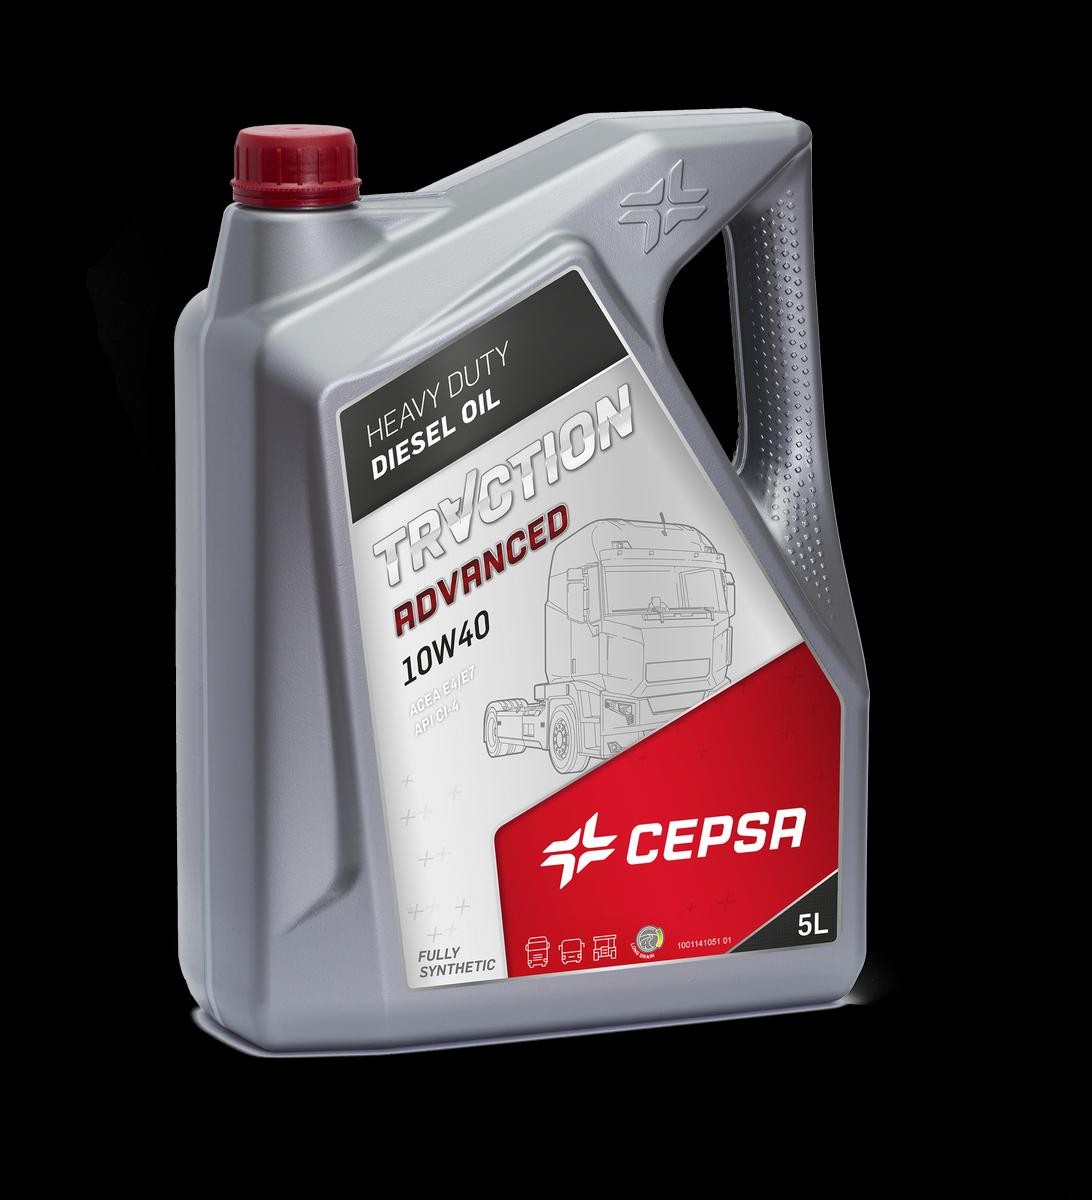 Engine oil CEPSA 10W-40, 5l, Synthetic, Full Synthetic Oil longlife 522583090